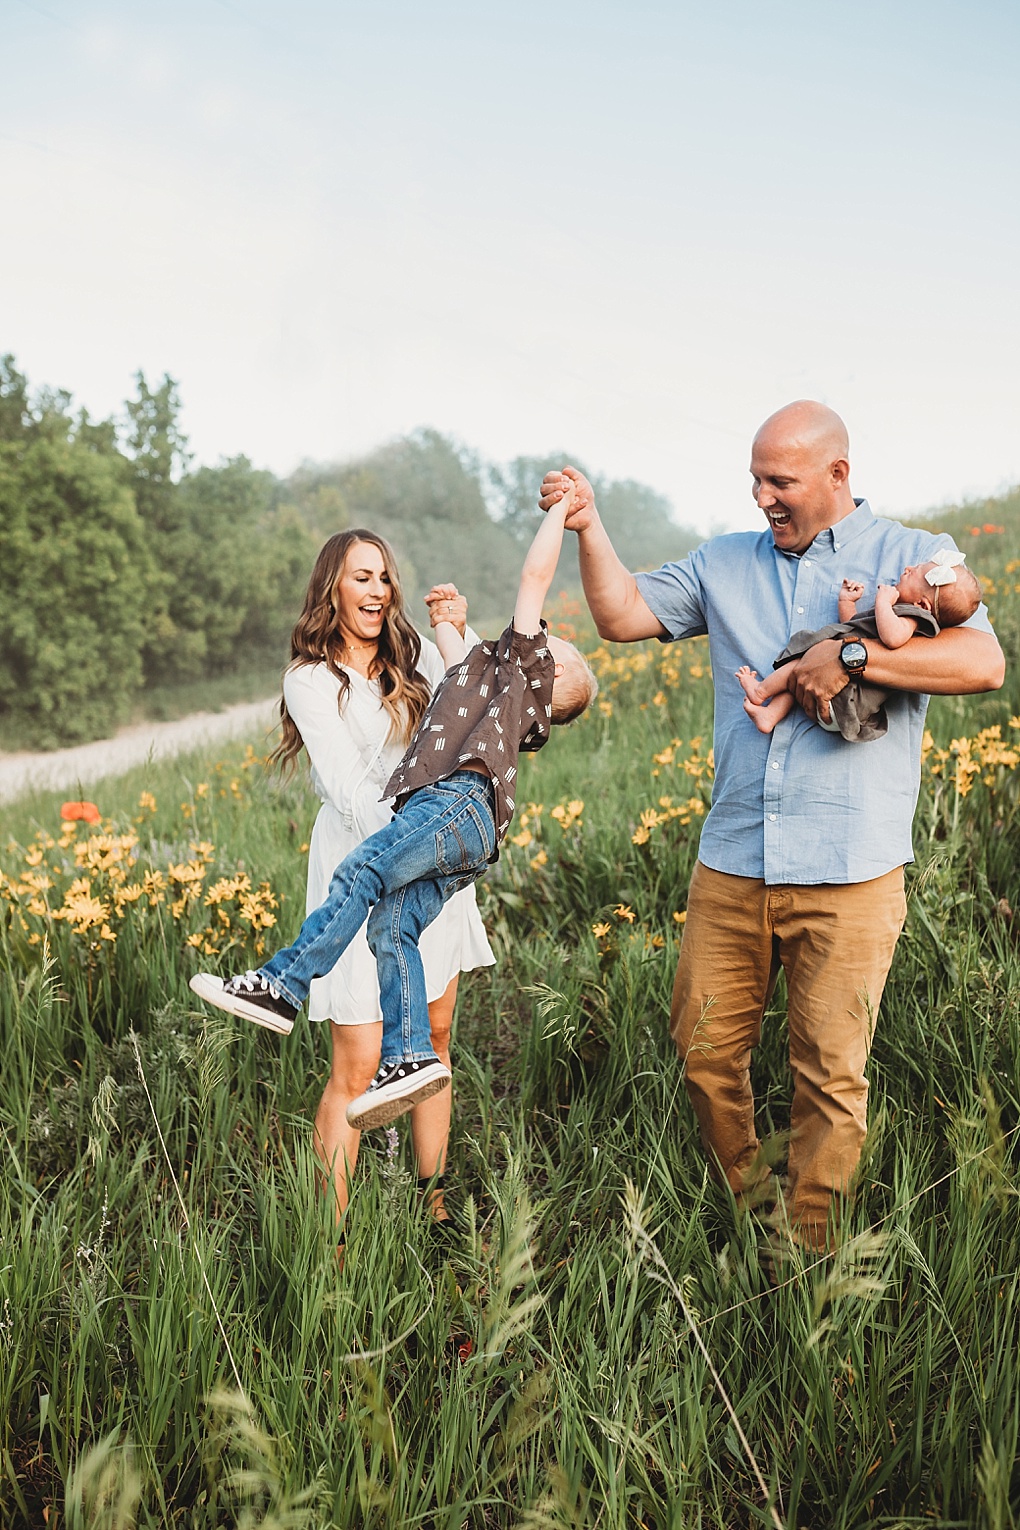 Bookmark this post ASAP if you need help planning your family photo. Utah Style Blogger Dani Marie is sharing her tip family photo outfit ideas here! 